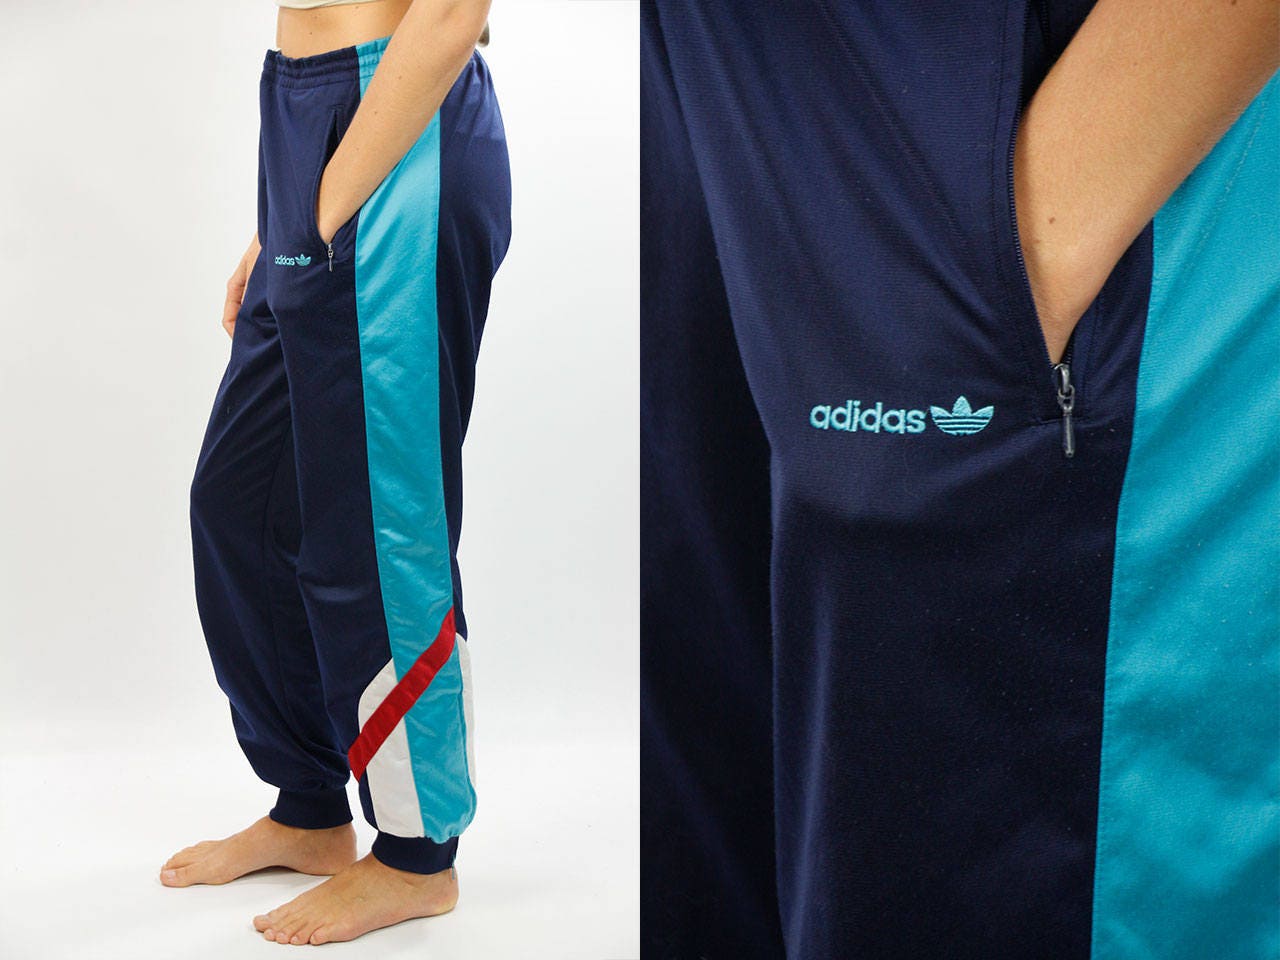 90s adidas tracksuit bottoms